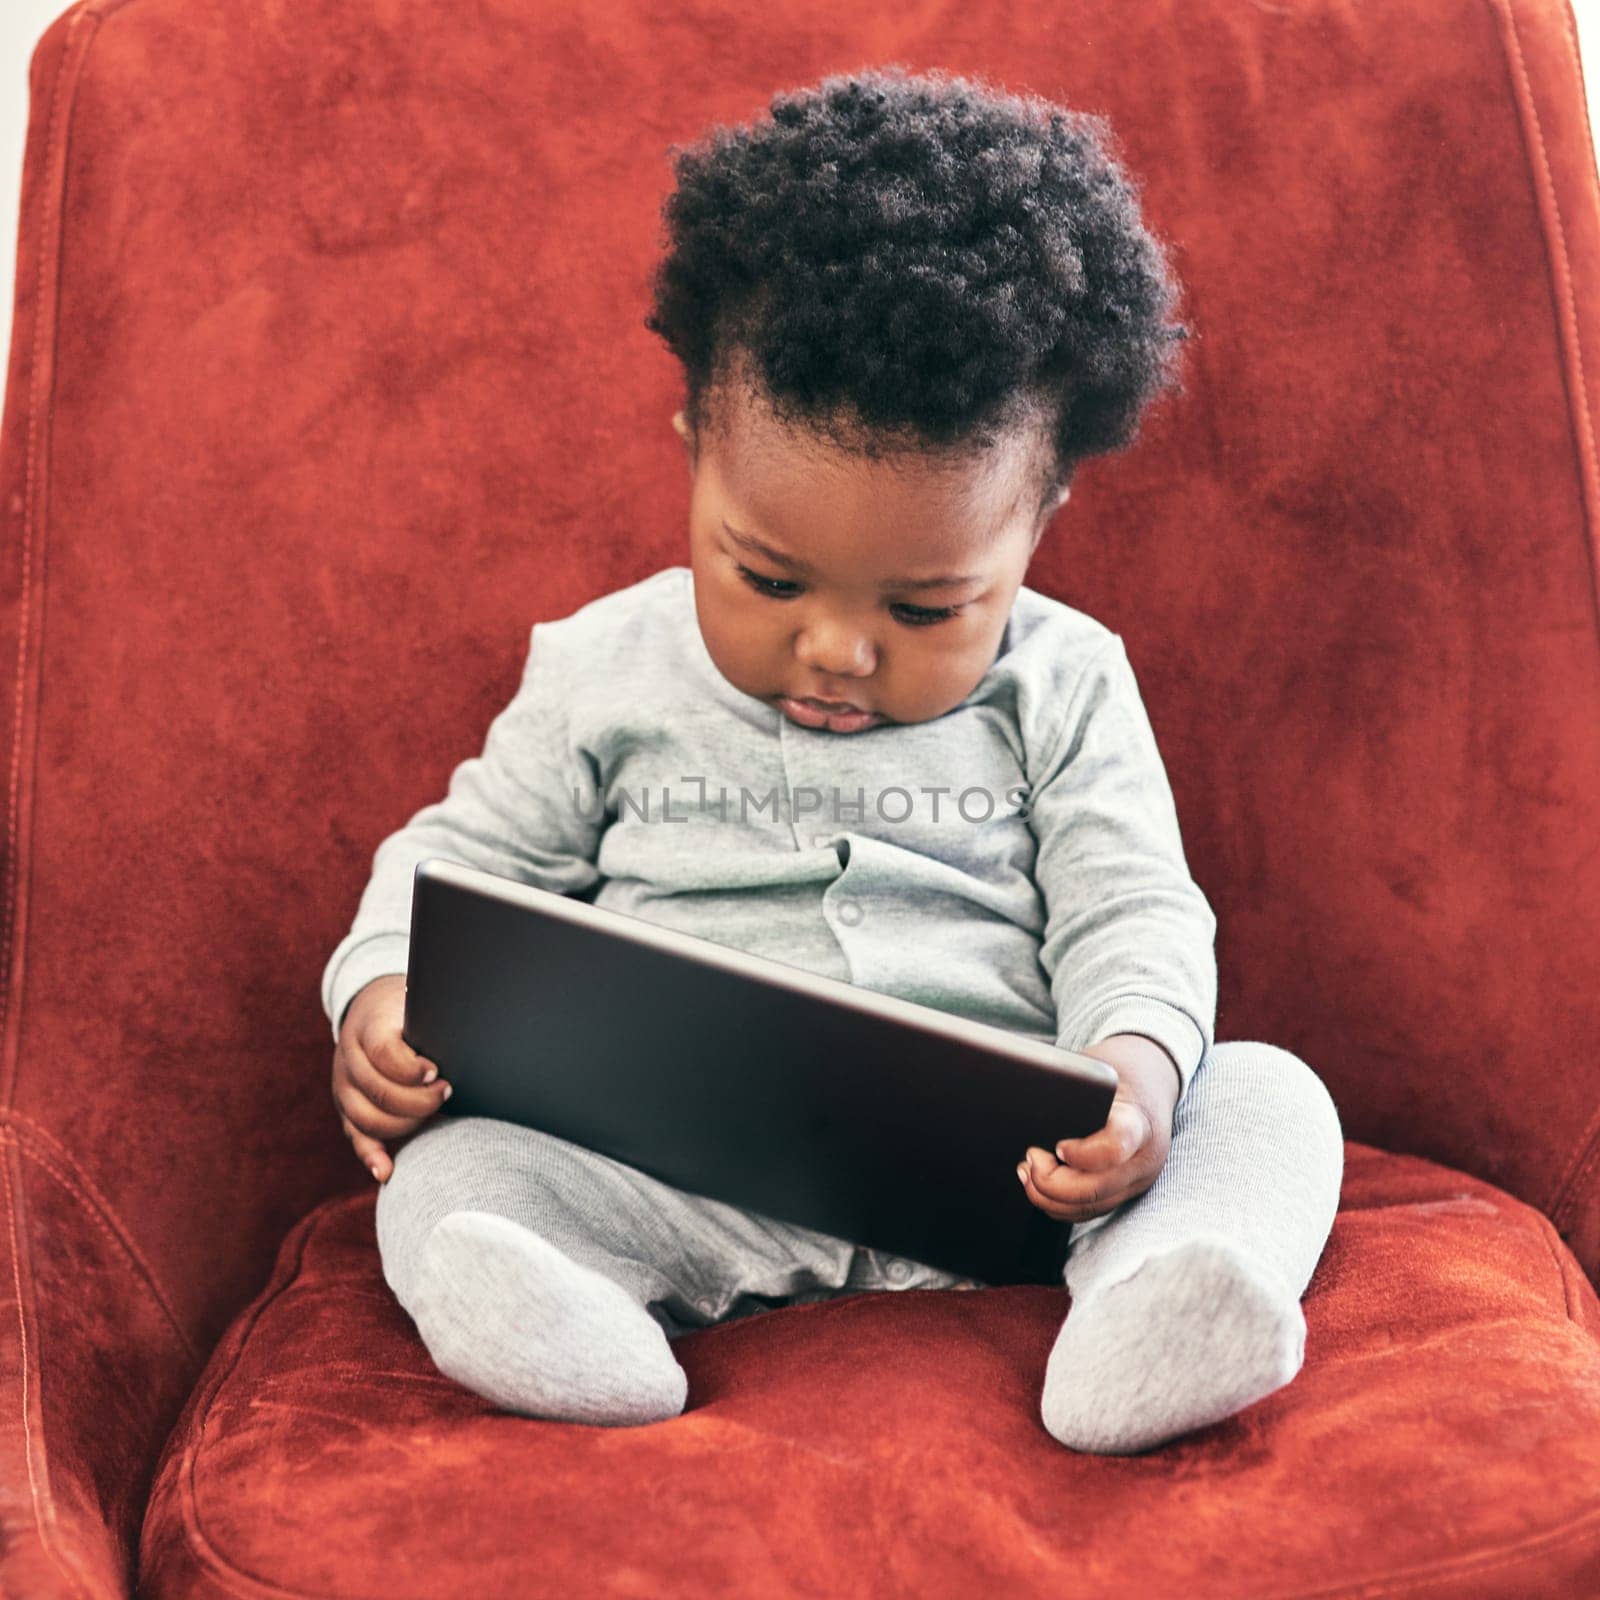 I need to check my emails.... Shot of a little baby boy sitting in a chair holding a digital tablet. by YuriArcurs